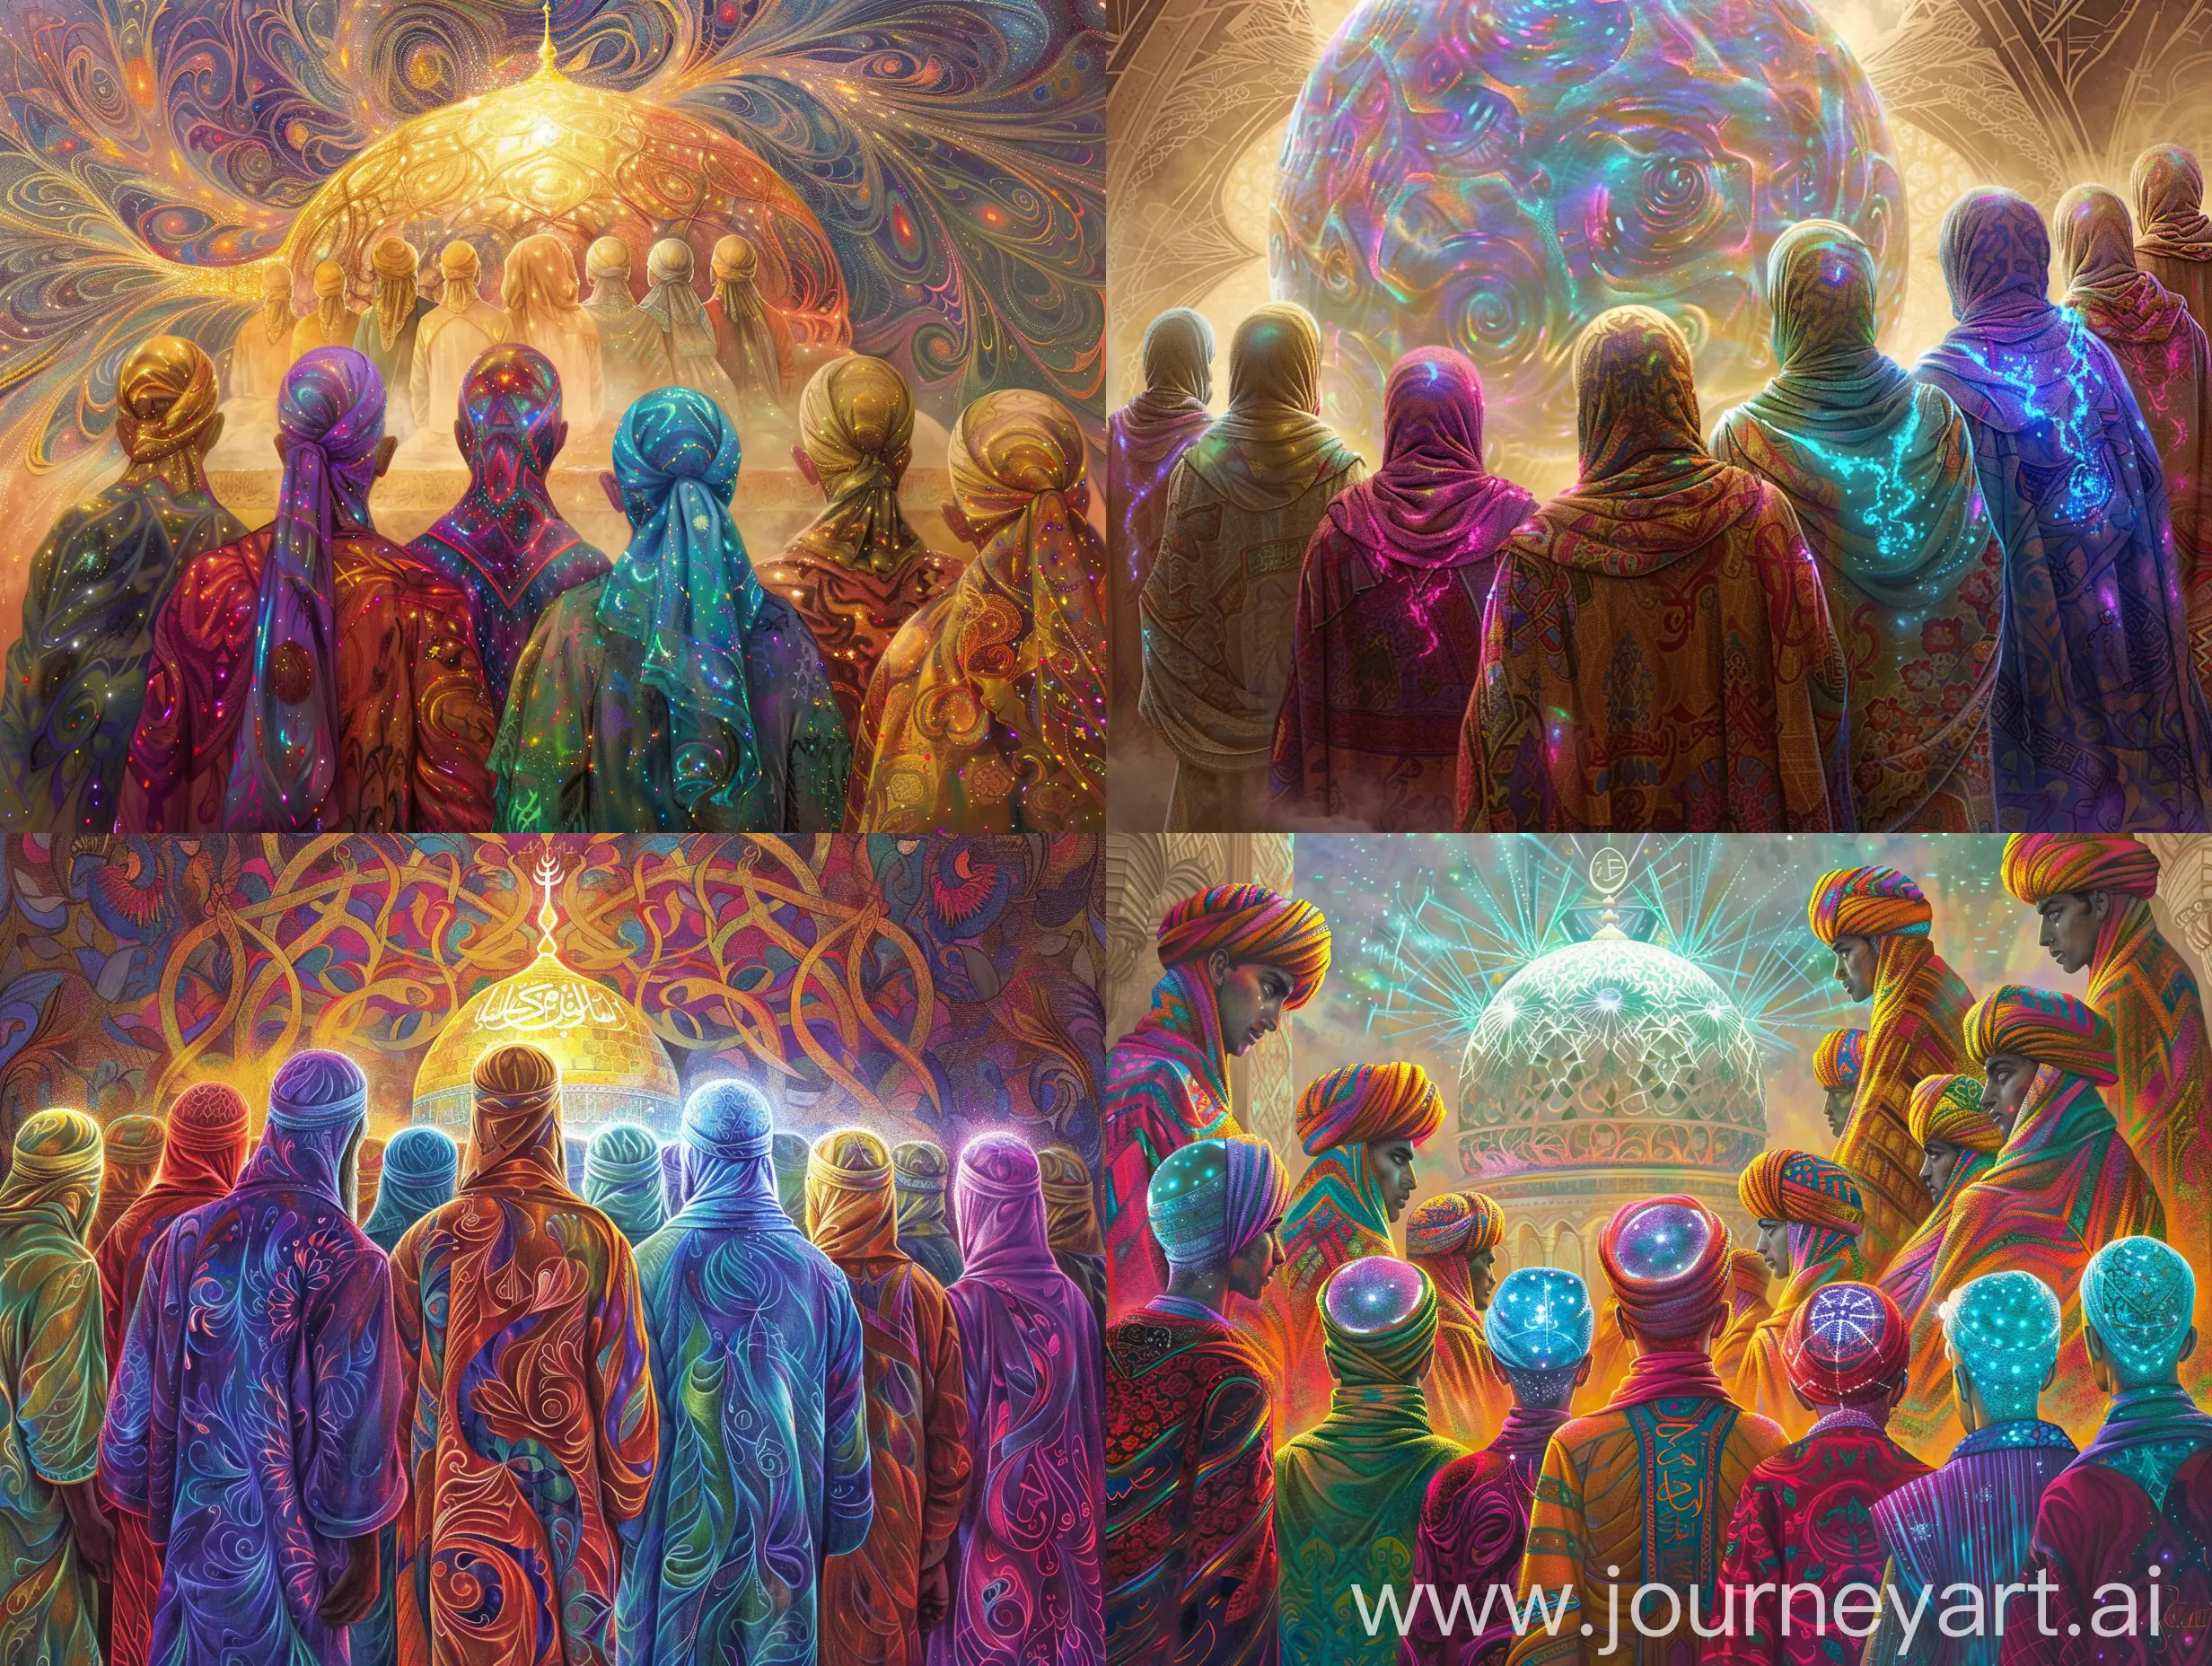 
hierarchy of holy youths in paradise, from behind, they are looking at dome of God and divinity. with vibrant and lush colored clothes and head scarf.
only 13 distinct men and 1 woman are glowing and shining, they are bioluminescent and made out of shining light.
their faces are covered with light, their faces are glowing

cinematic, kaleidoscope of colors. Highly-detailed,  ultra detailed
photo-realistic, epic, intricate, avangard islamic, swirling patternsswirling patterns